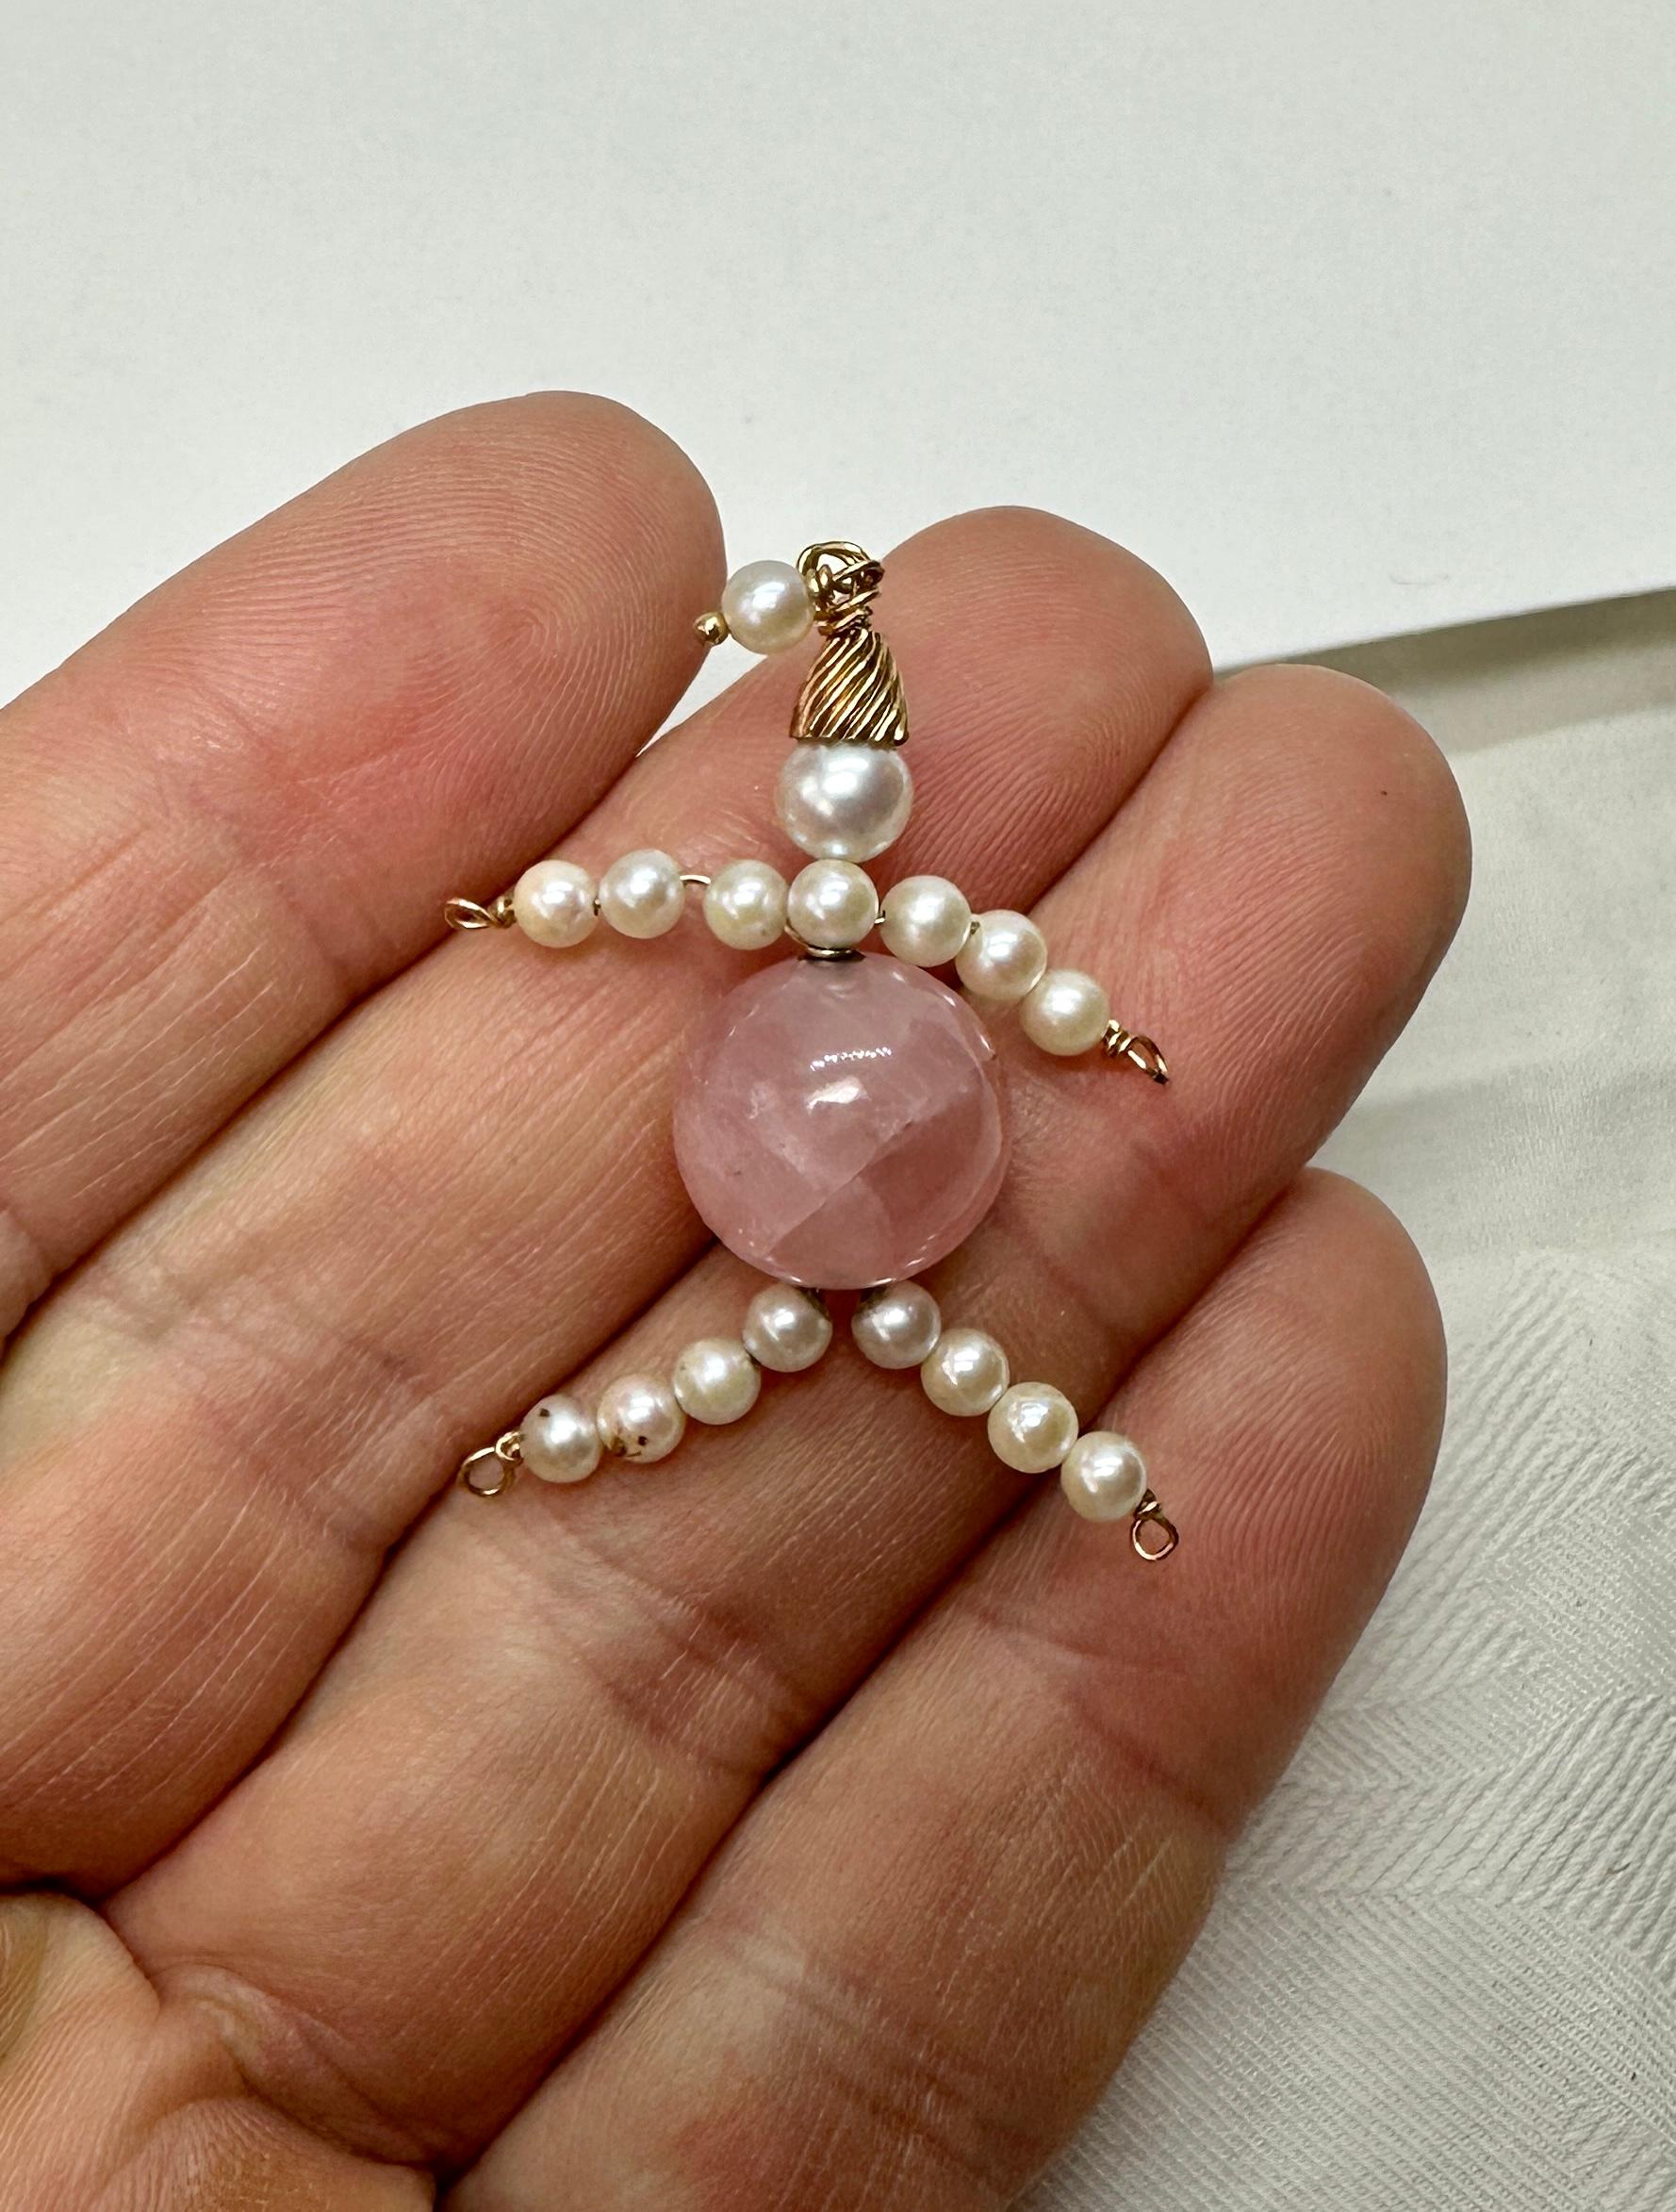 THIS IS A WONDERFUL JEWELED ANTIQUE ART DECO - RETRO PENDANT OR CHARM IN THE FORM OF A LADY OR MAN WITH A HAT IN ROSE QUARTZ, PEARL AND 14 KARAT GOLD. 
WE ALSO HAVE A BLACK ONYX MATCHING PENDANT!  This is in another listing but it is pictured below